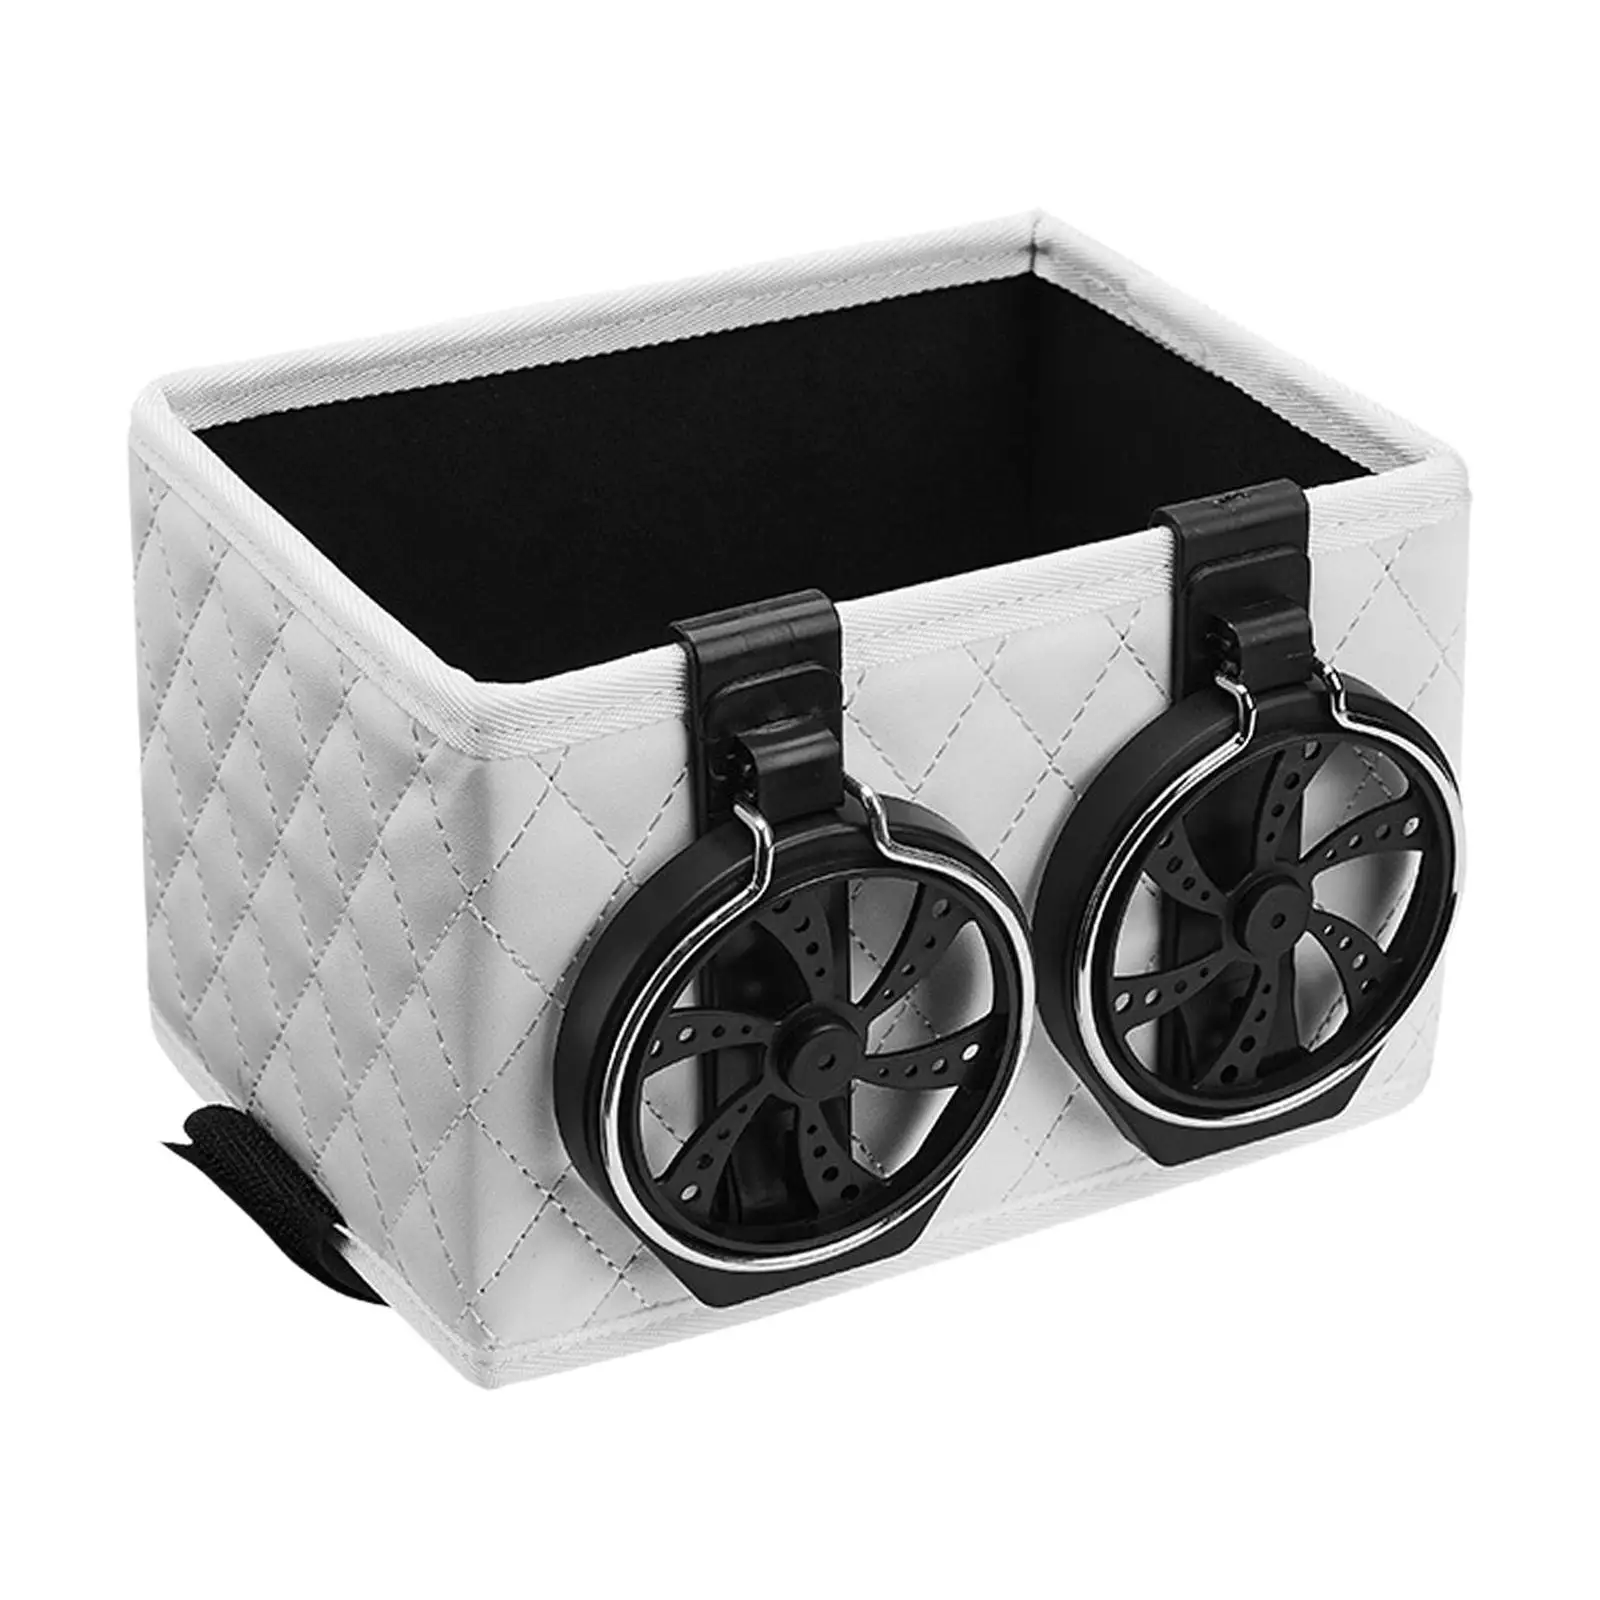 Car Storage Box car Storage Foldable Cup Holder for Paper Towels